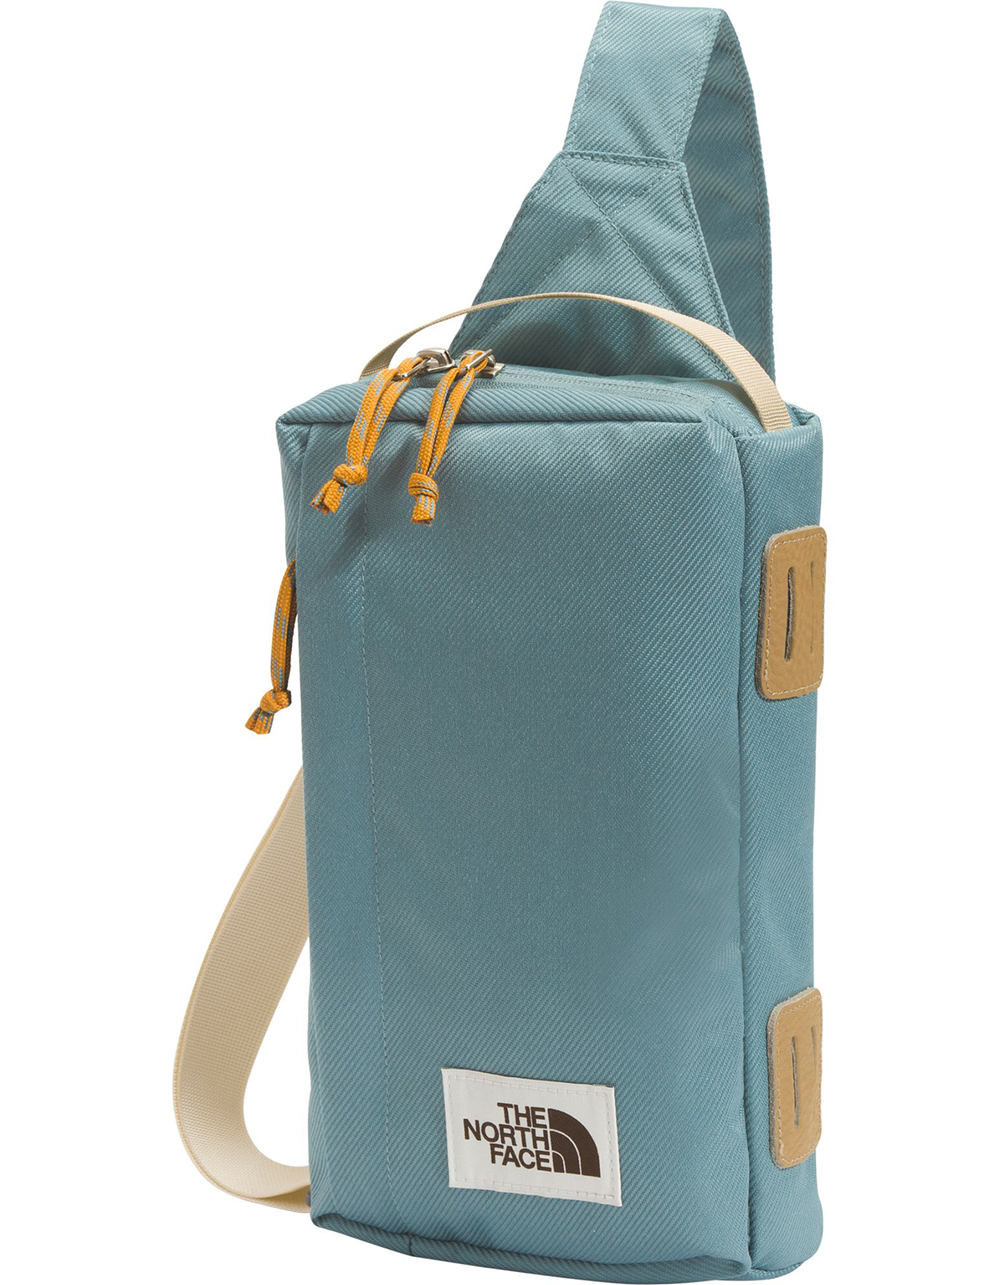 THE NORTH FACE Field Bag - BLUE COMBO | Tillys